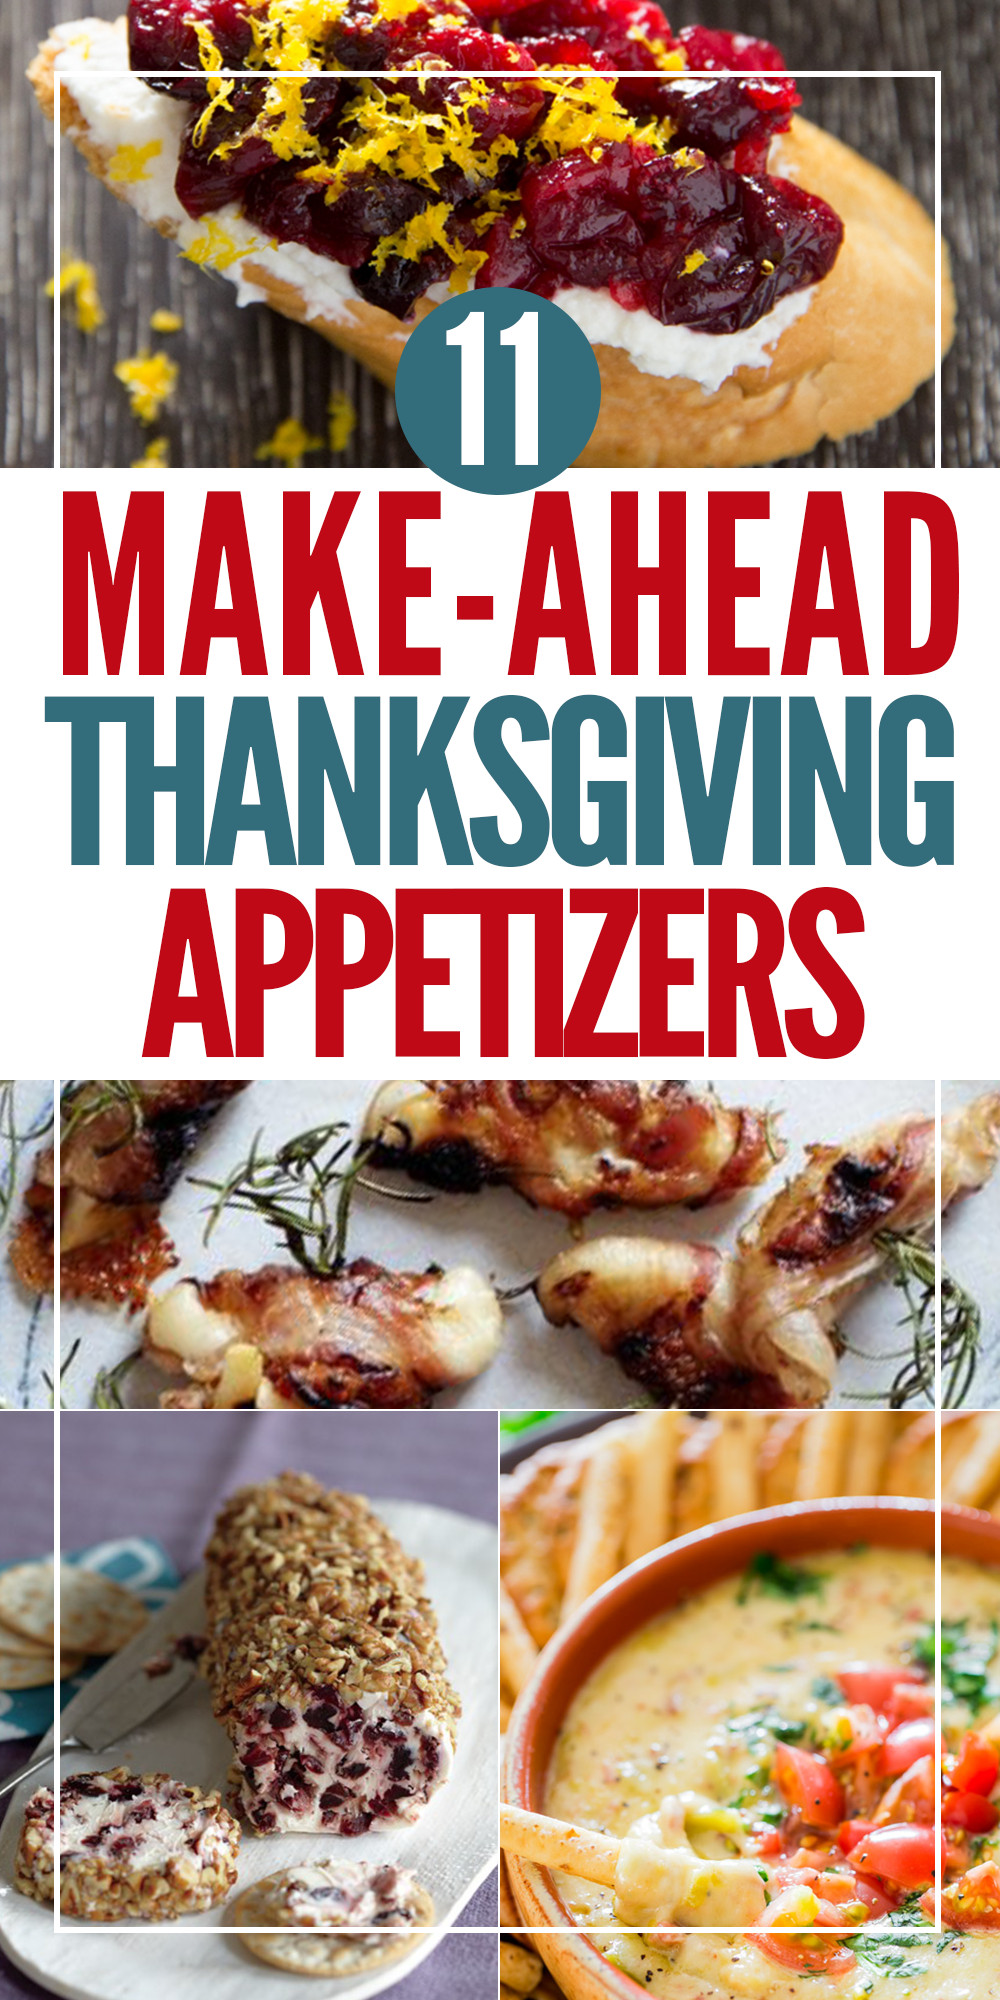 Make Ahead Thanksgiving Appetizers
 11 easy and delicious make ahead Thanksgiving appetizers